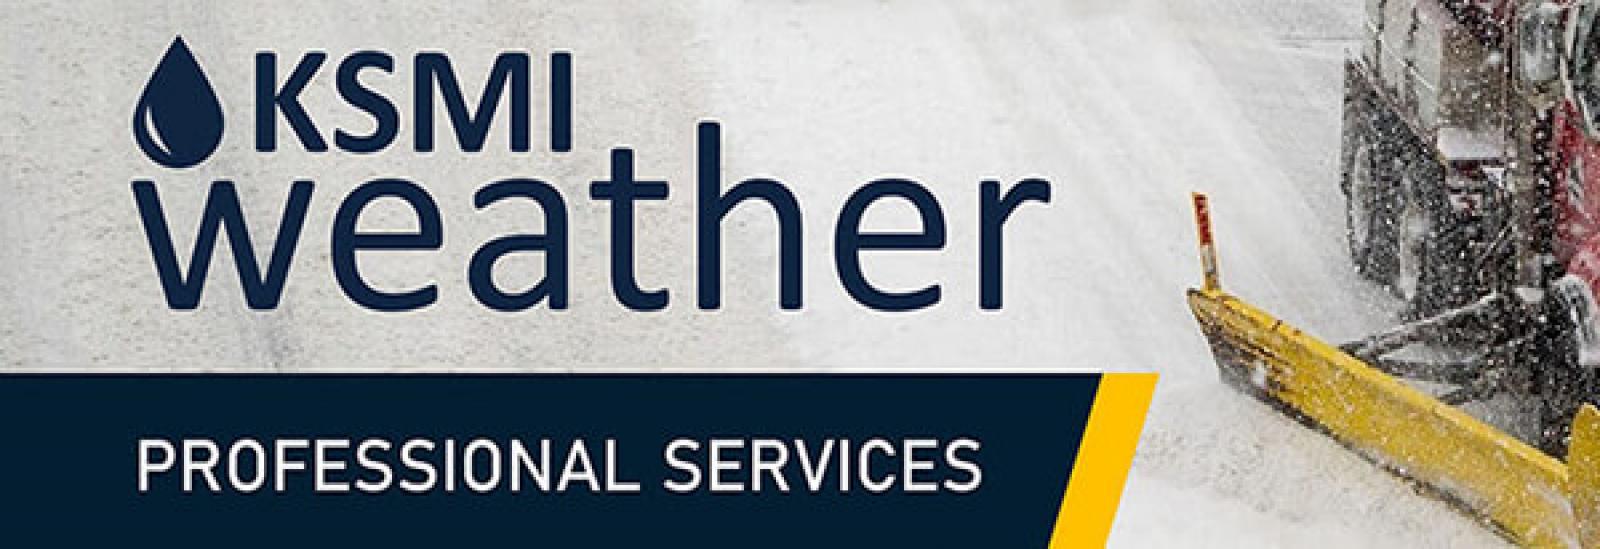 LO members can register for the KSMI Weather App